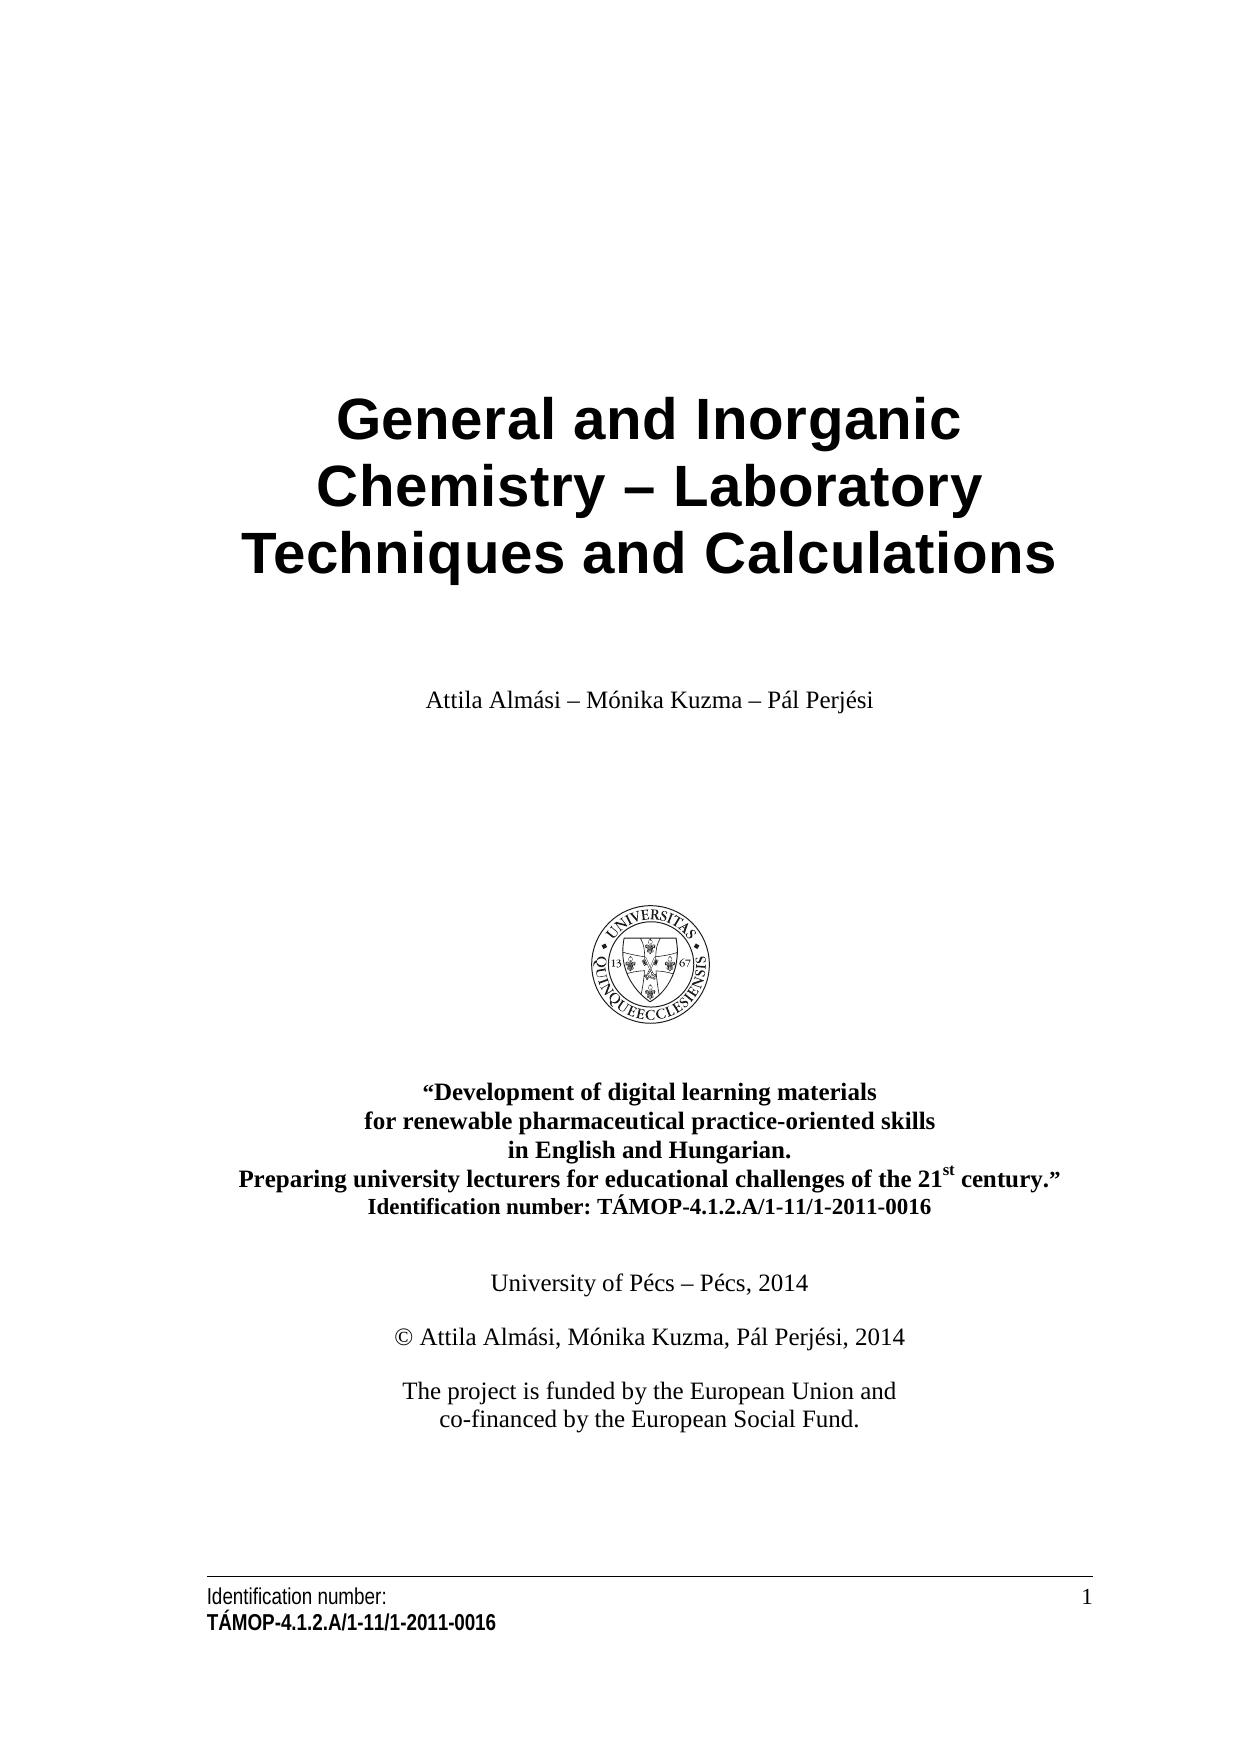 General and Inorganic Chemistry – Laboratory Techniques and Calculations